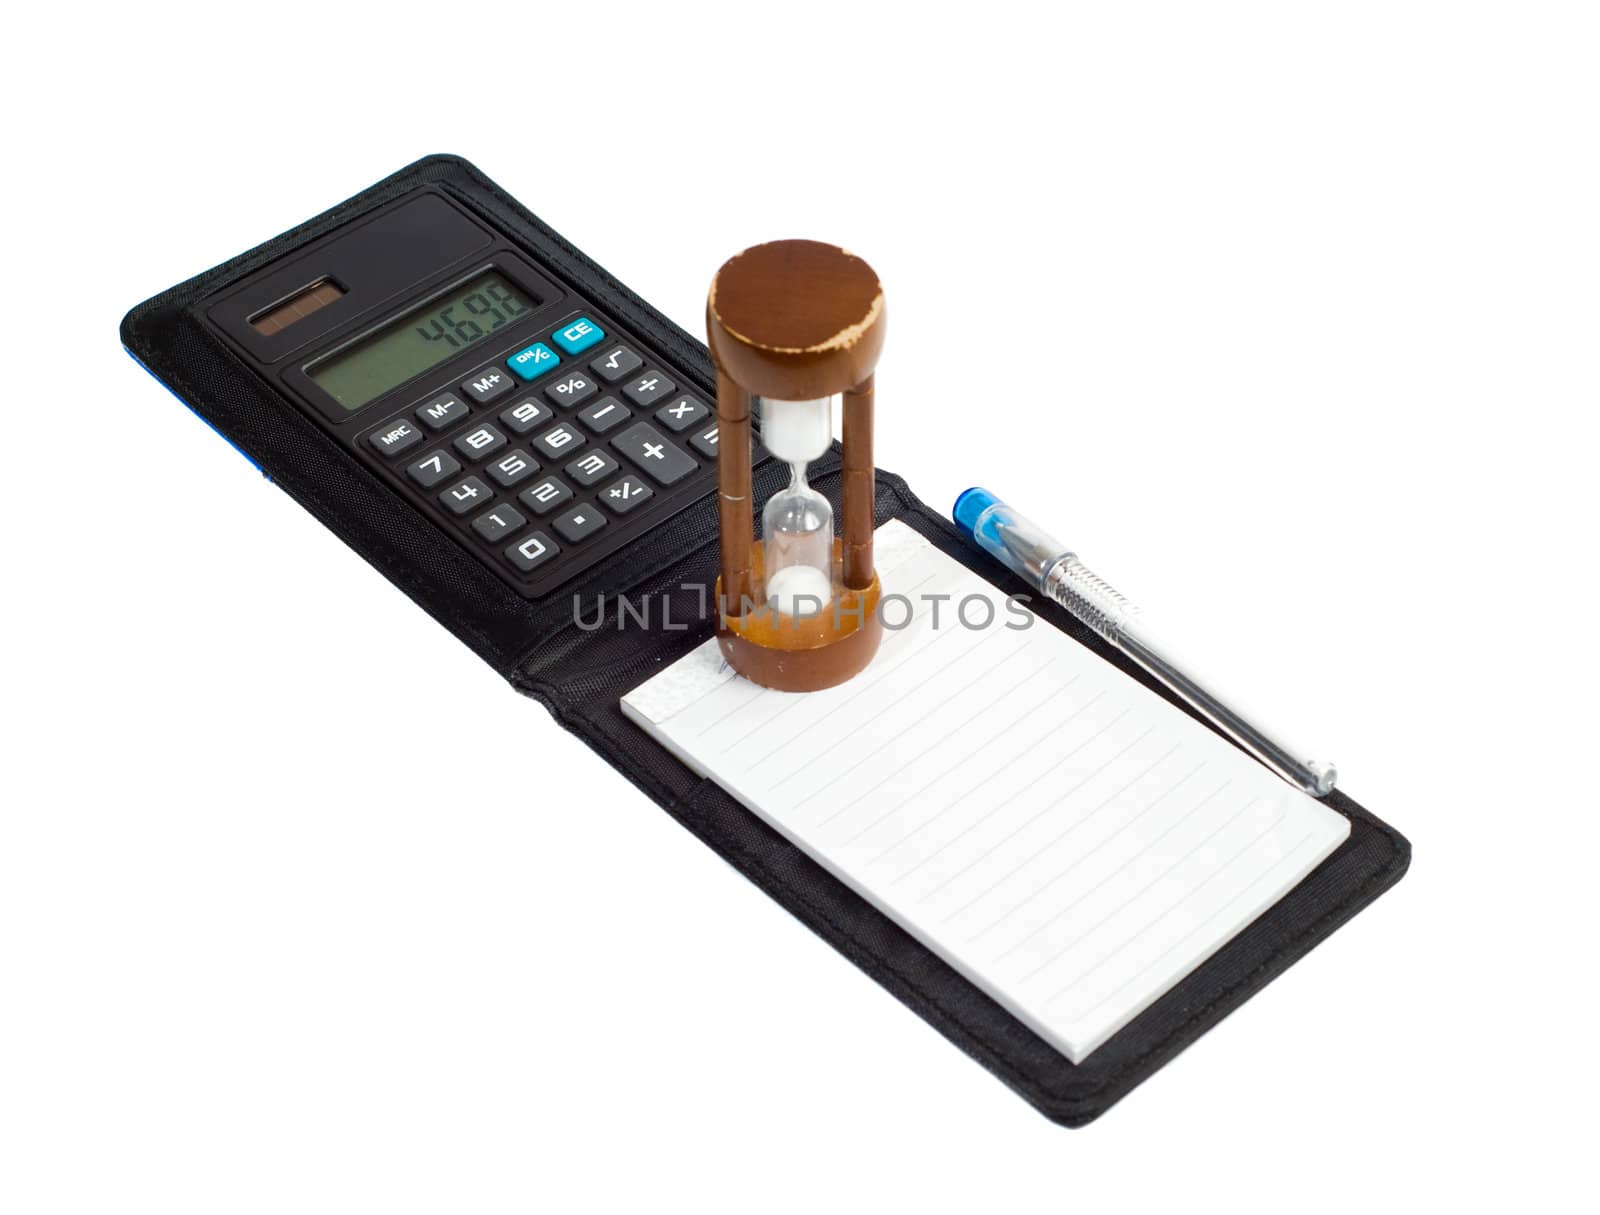 Concept image of tax time, by using a caluclator along with an hourglass, isolated against a white background